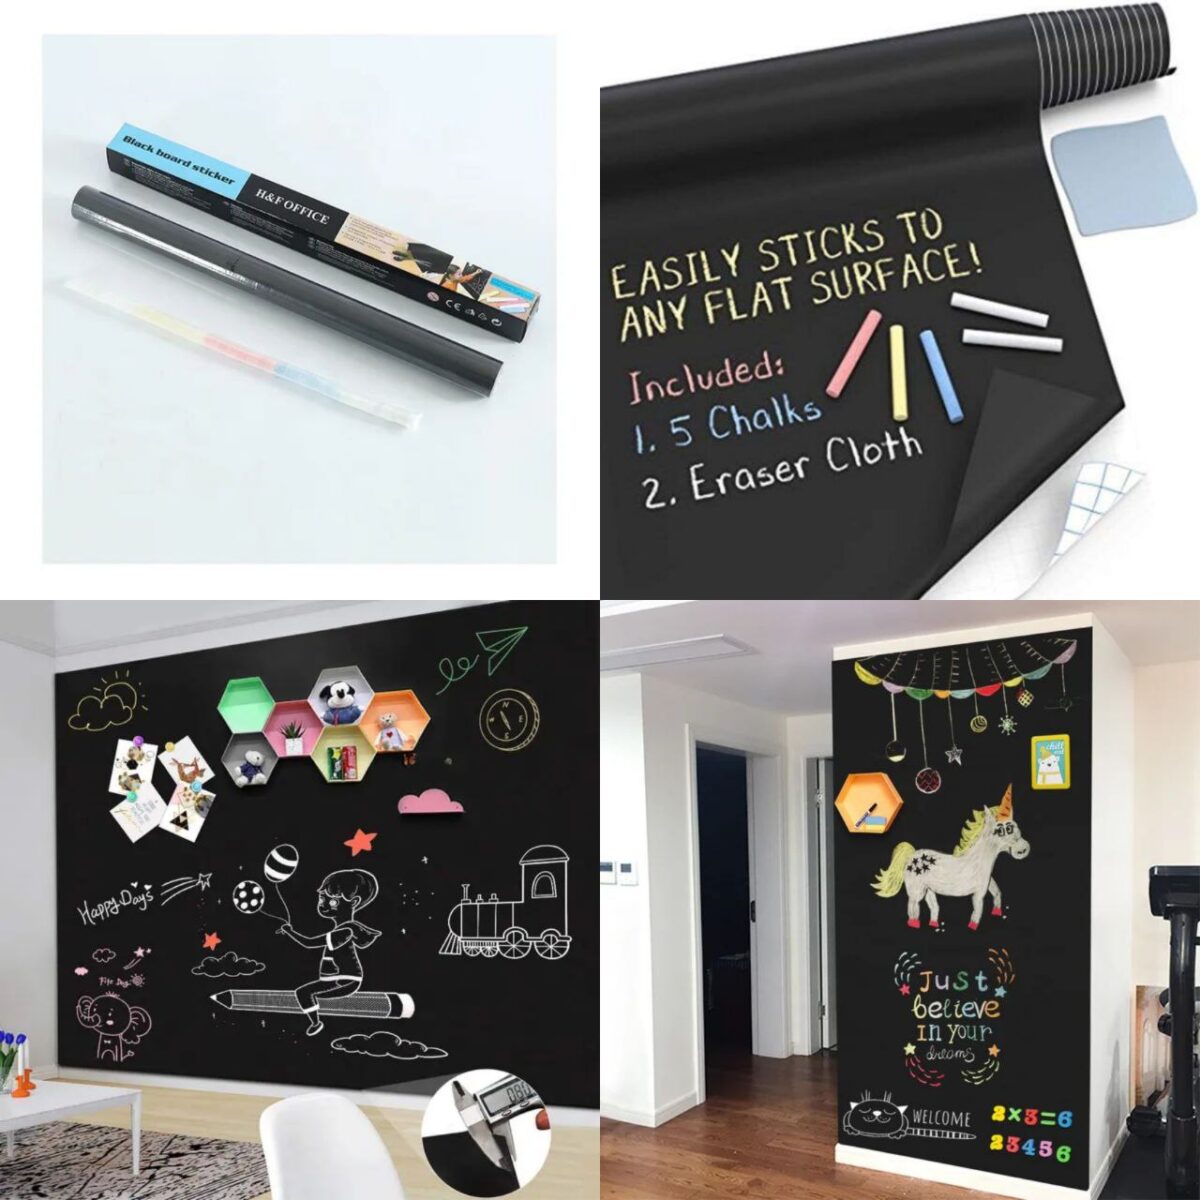 A self-adhesive blackboard sticker is a versatile and convenient product designed for transforming surfaces into functional chalkboards. This sticker features a peel-and-stick backing, allowing easy application to various smooth surfaces such as walls, doors, or furniture. The blackboard surface is suitable for writing with chalk, and it can be easily wiped clean for reuse. This product is ideal for creating writable spaces in homes, offices, classrooms, or any environment where a temporary or movable chalkboard is desired. It offers a practical and customizable solution for notes, reminders, or creative expression